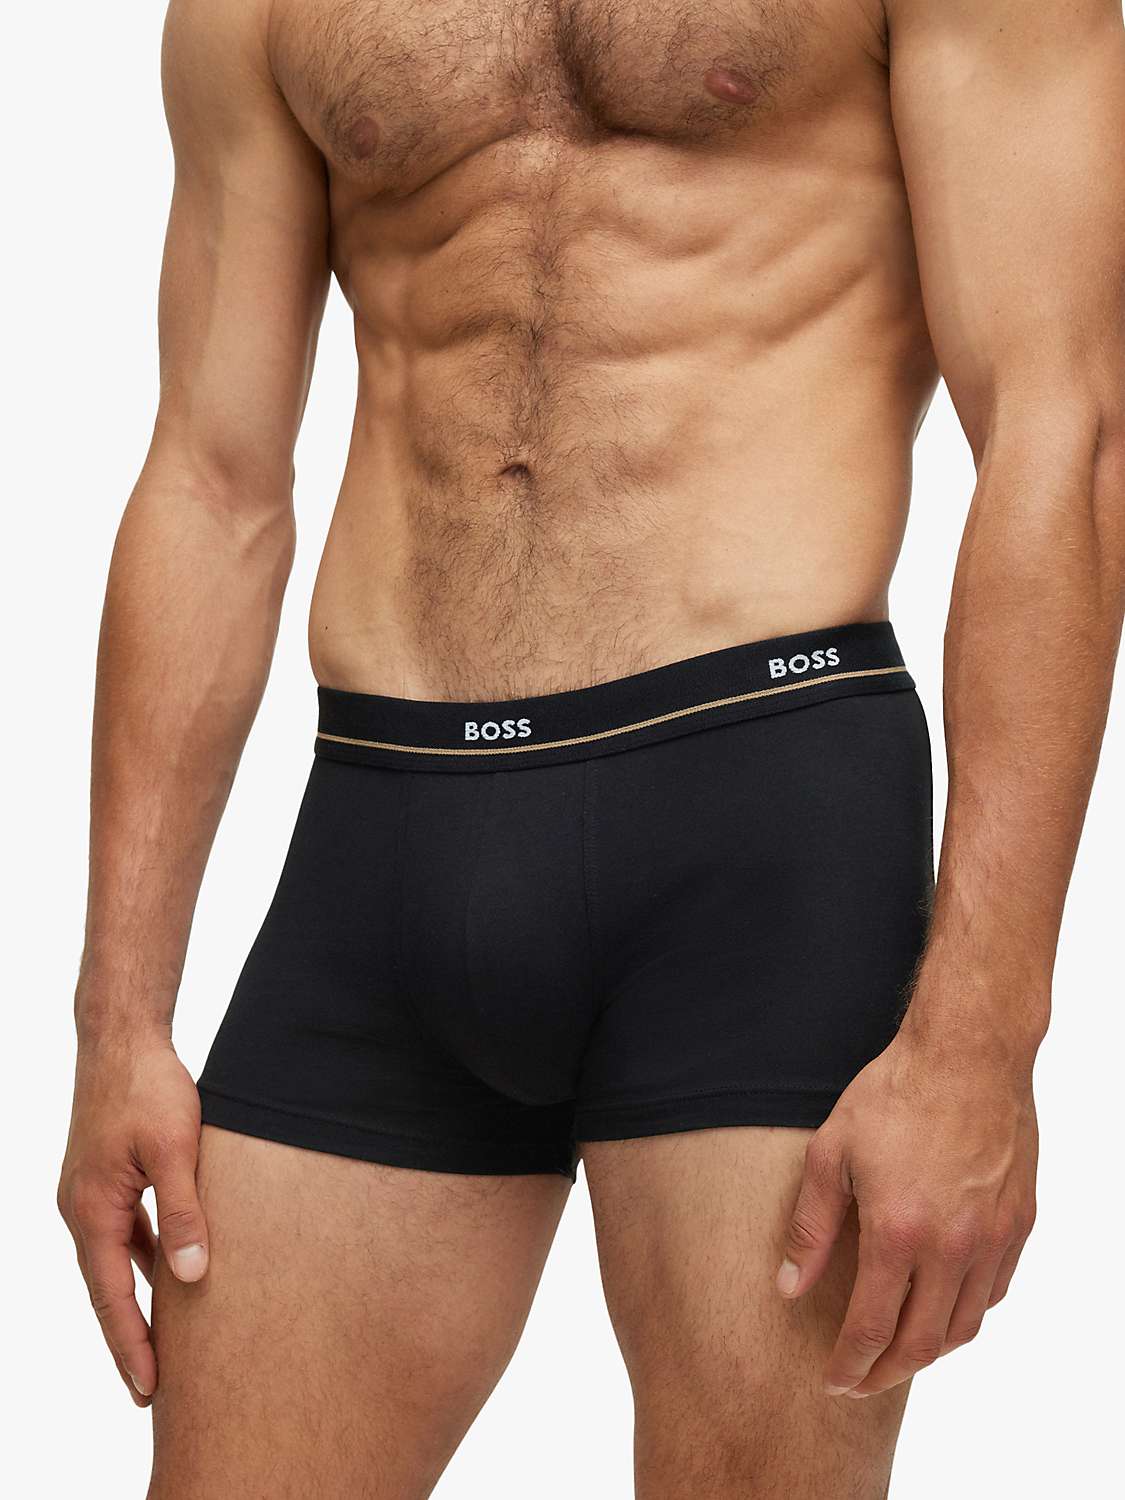 Buy BOSS Essential Cotton Logo Waistband Trunks, Pack of 5 Online at johnlewis.com